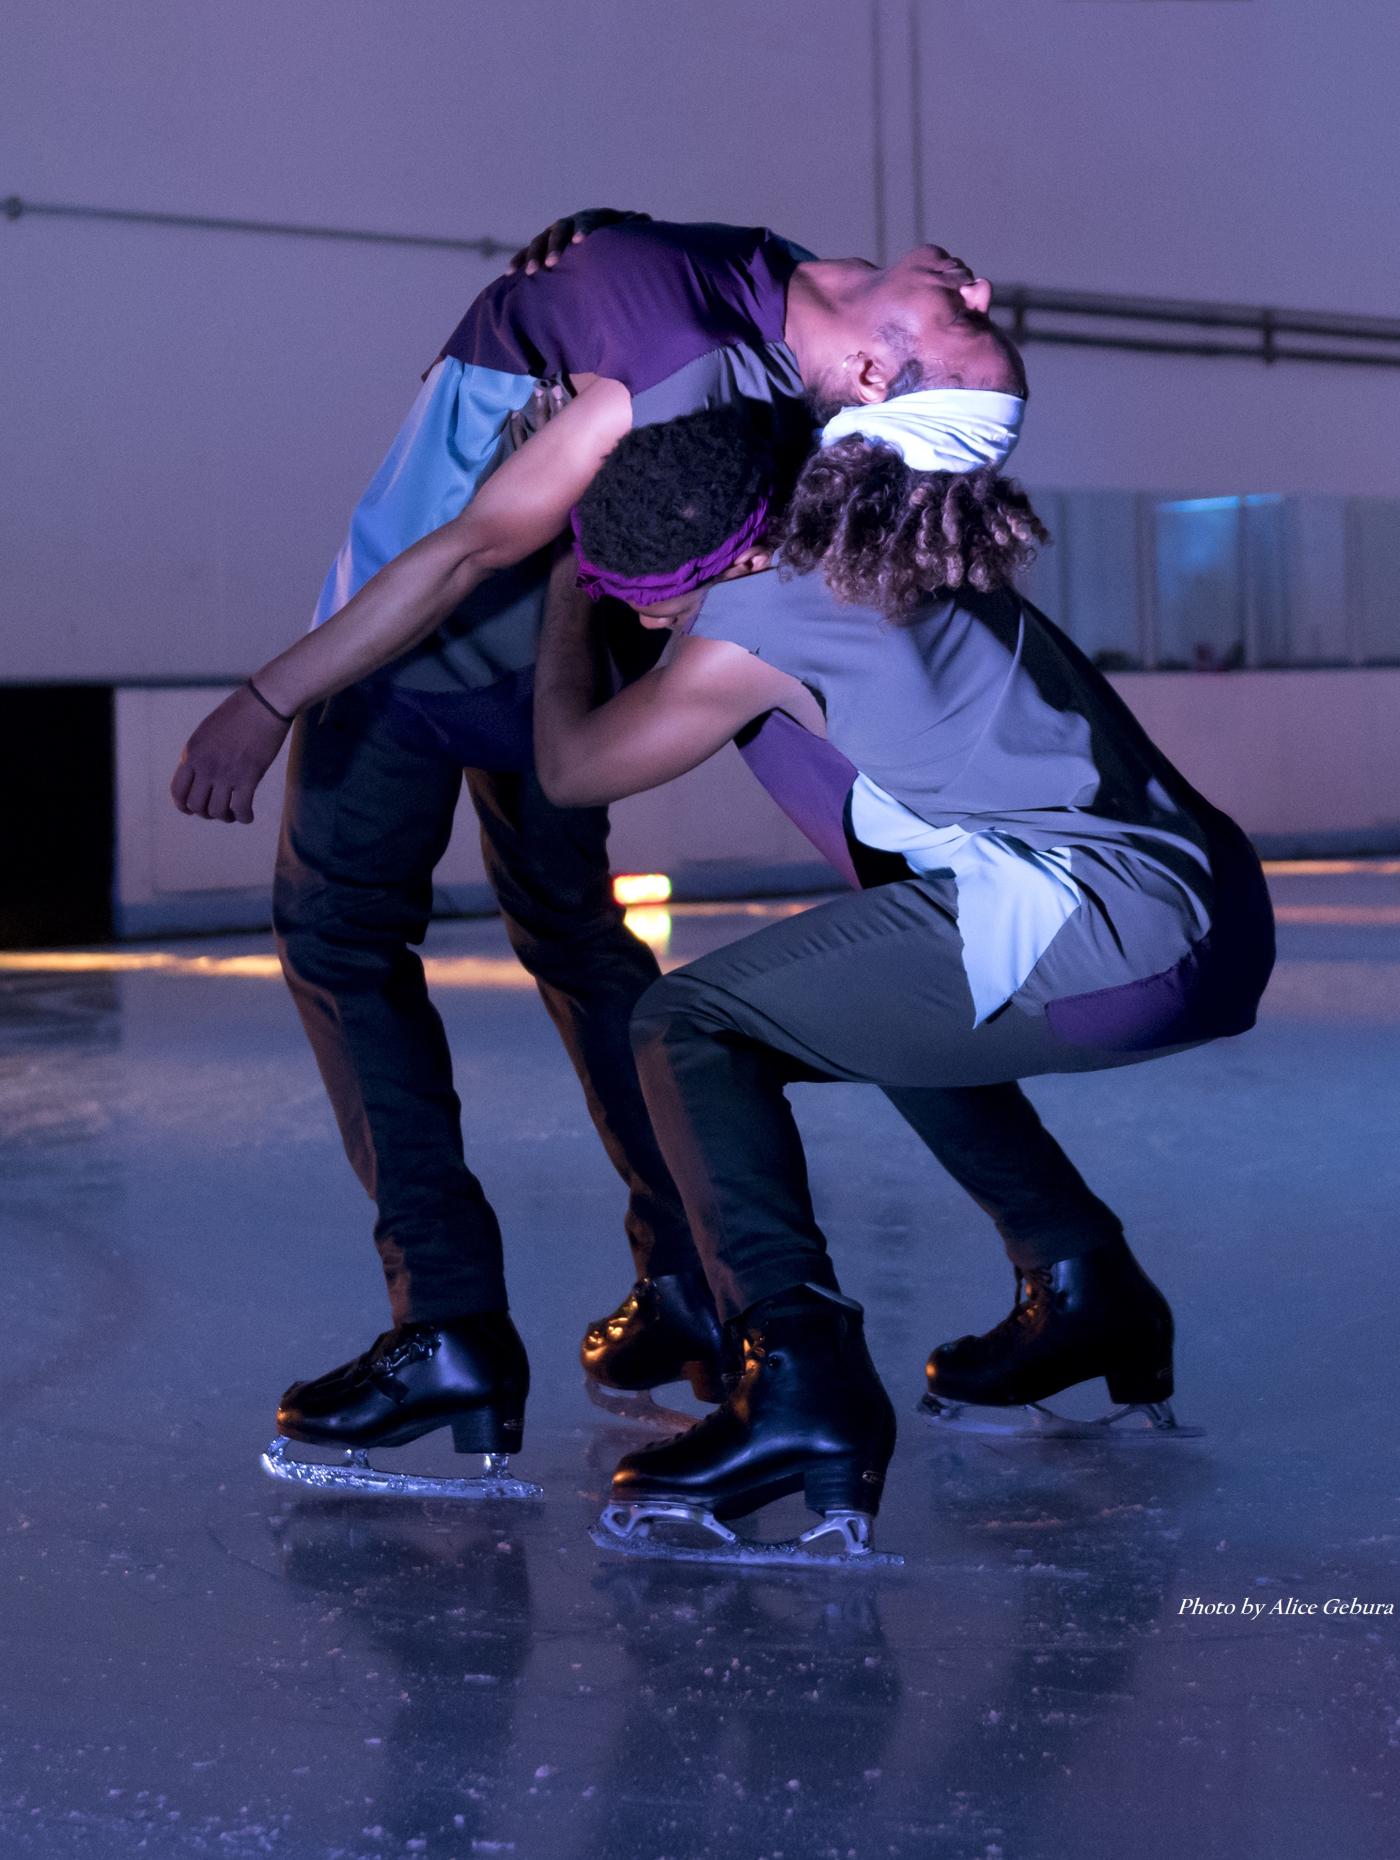 A Black ice skater leans over the back of another Black ice skater.